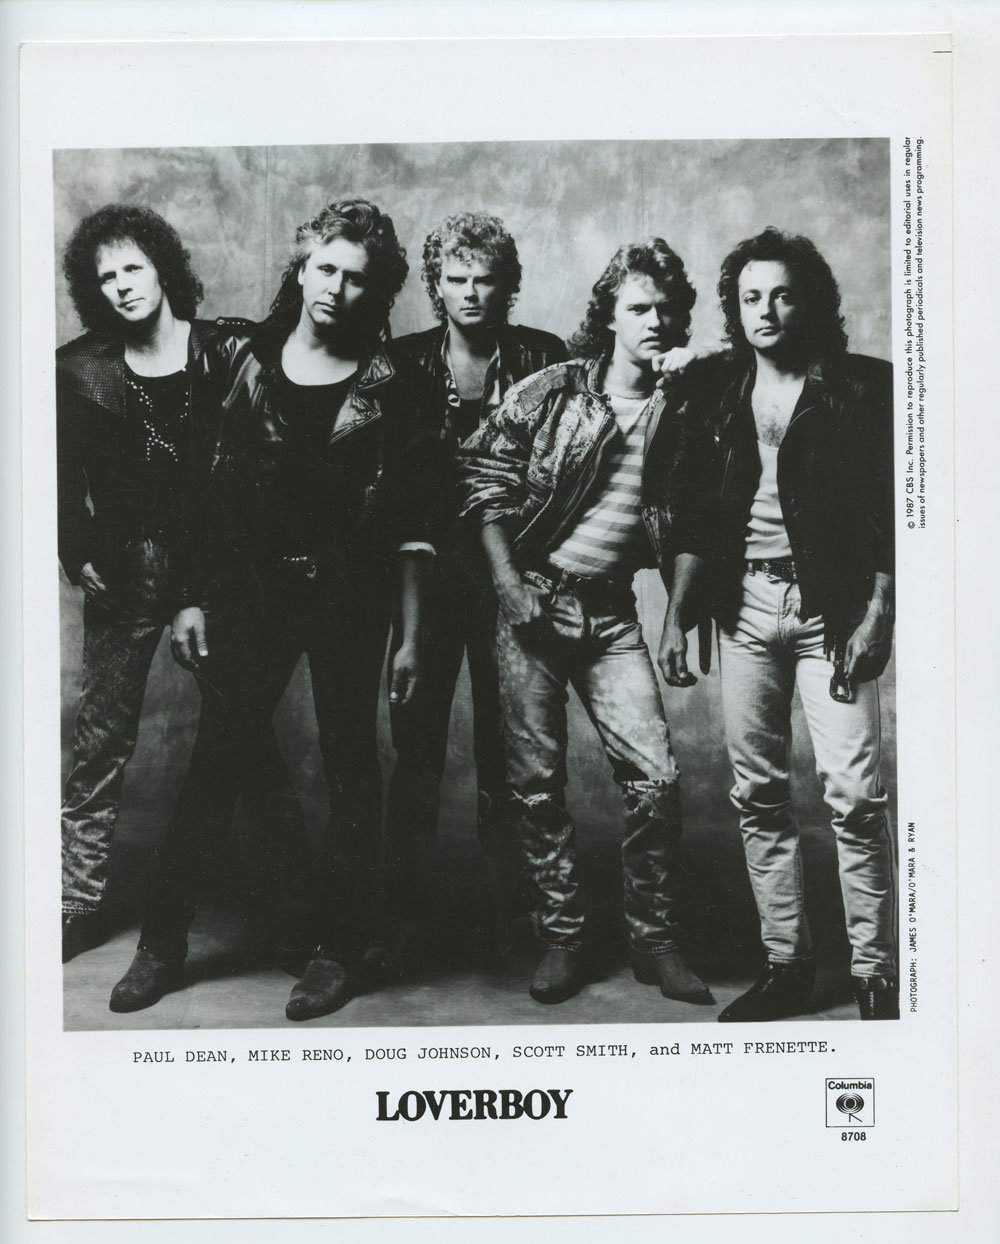 Loverboy Photo 1980s Columbia Records